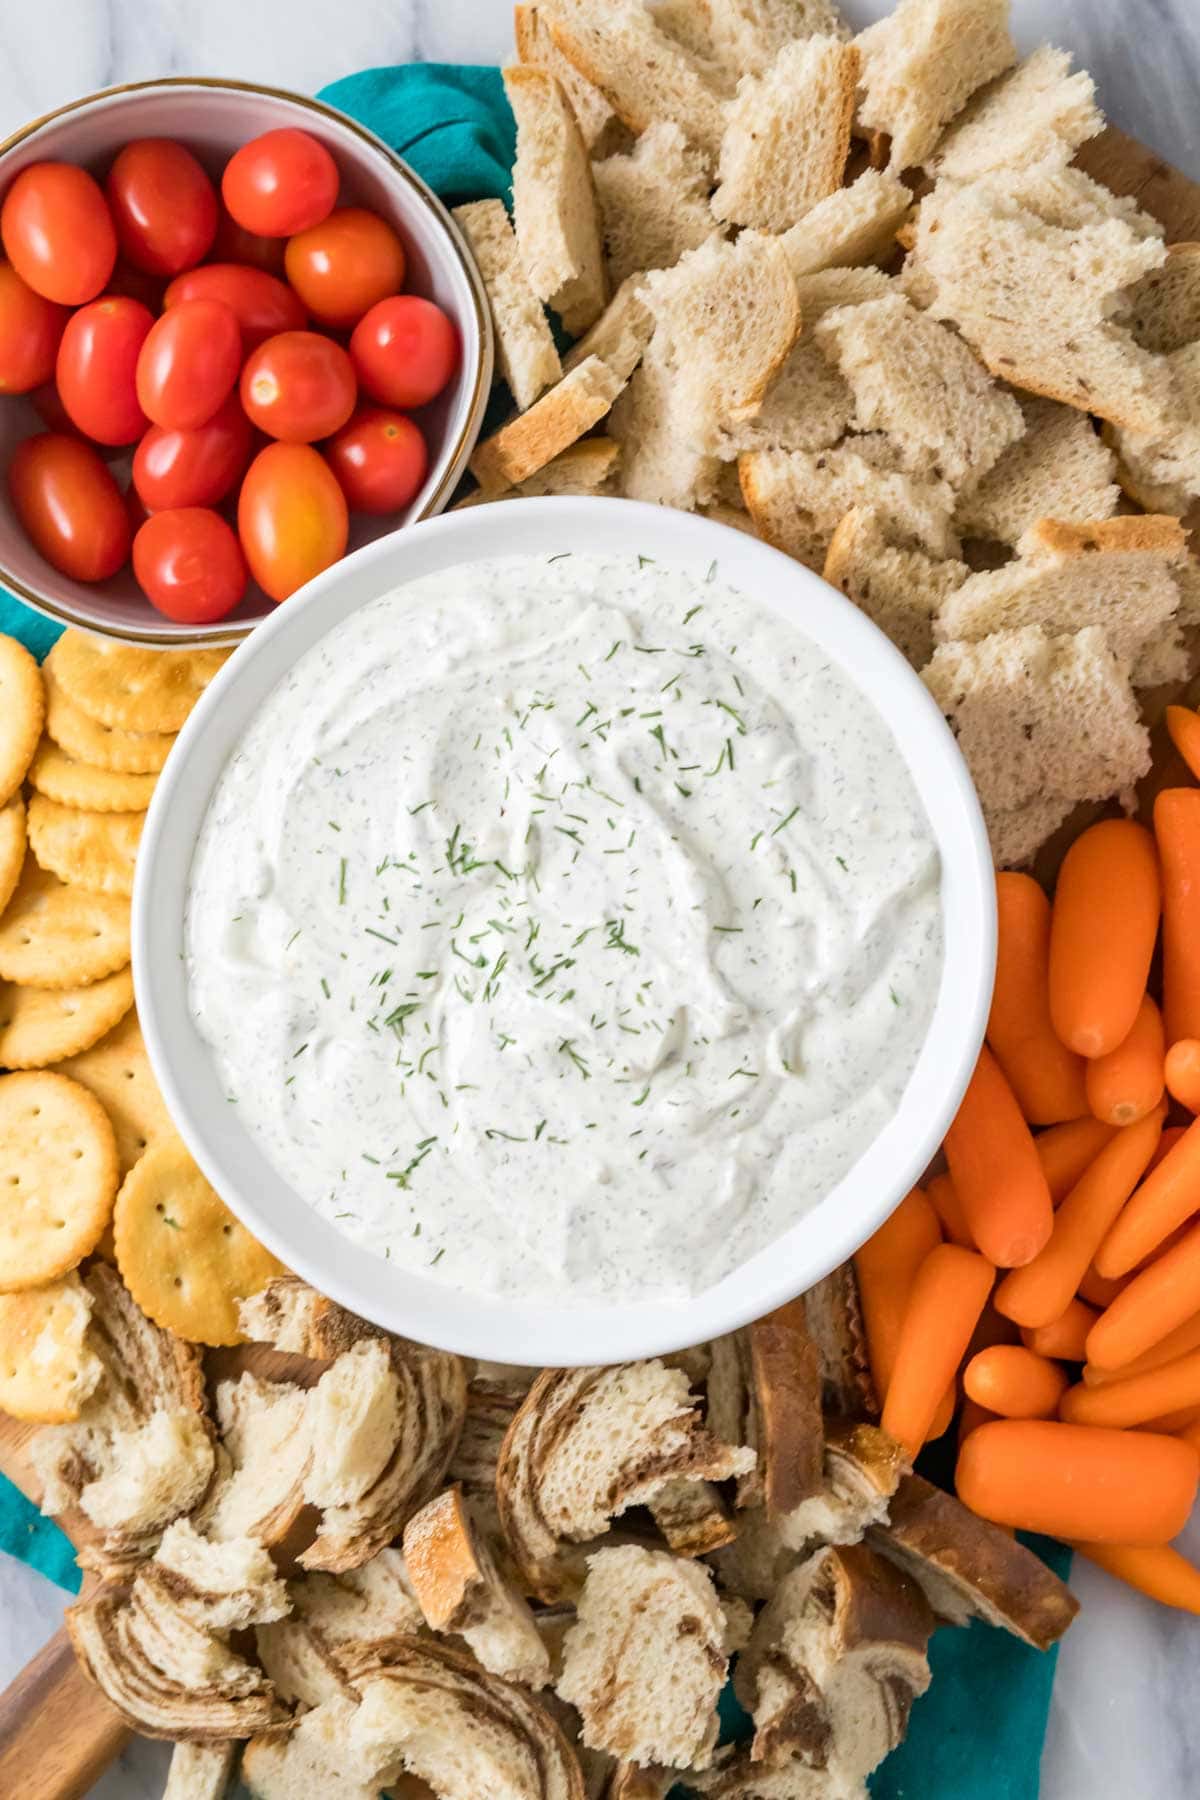 Overhead view of a bowl of dip surrounded by cherry tomatoes, celery, crackers, and torn bread pieces.